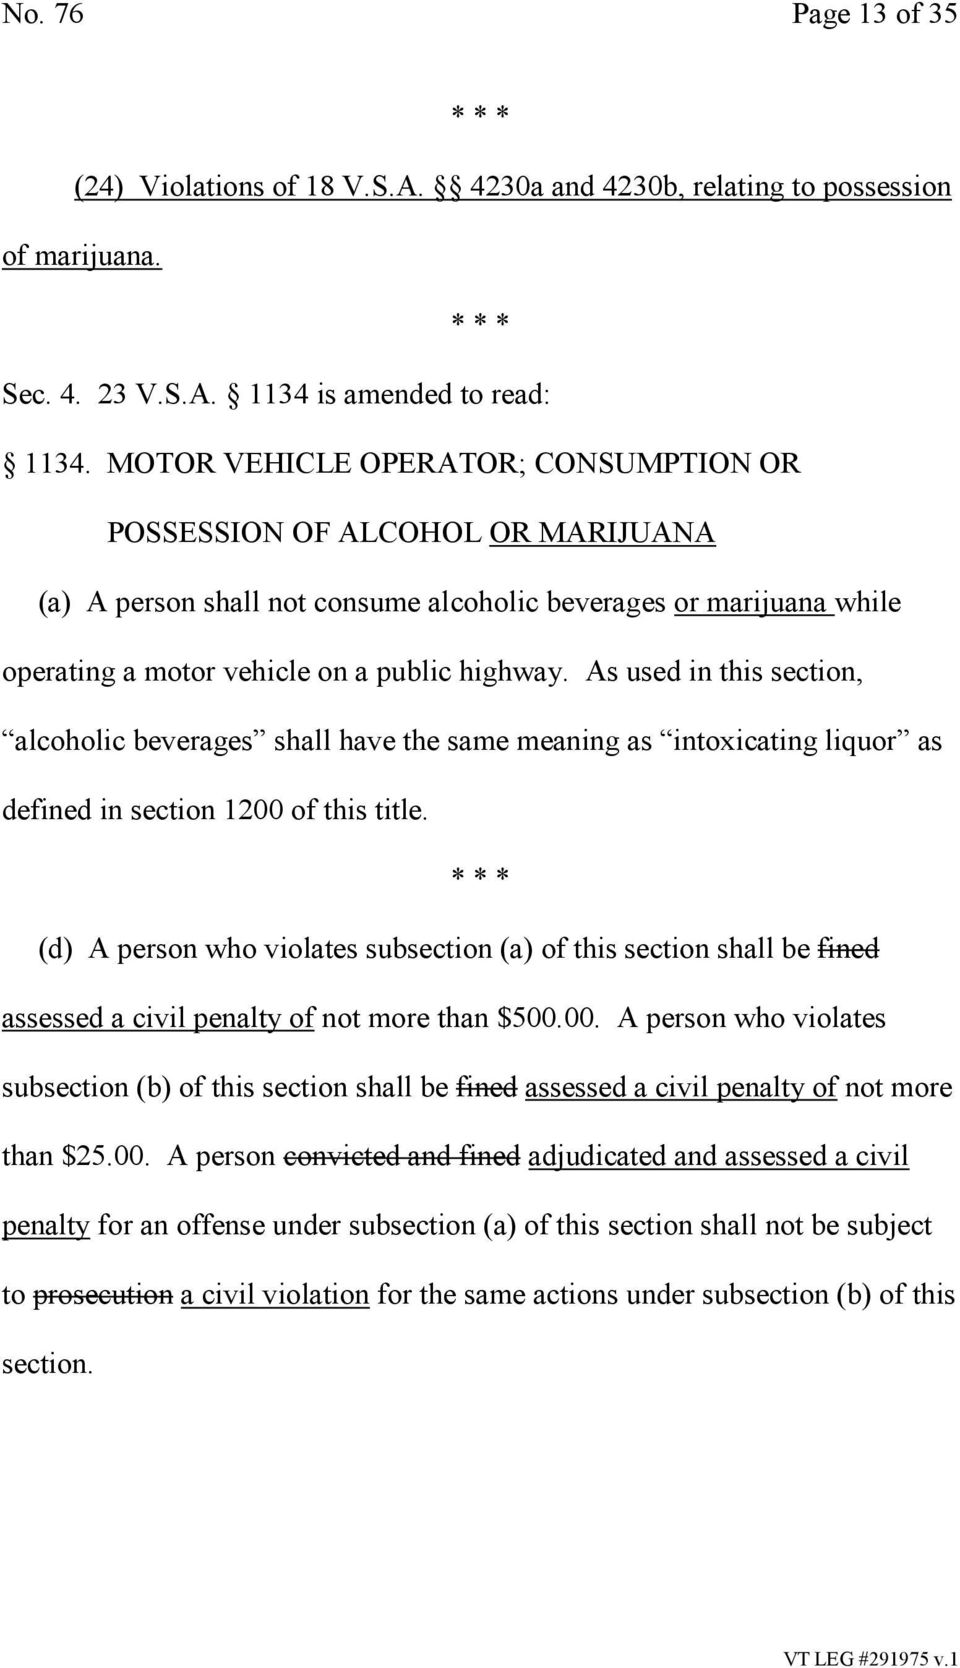 As used in this section, alcoholic beverages shall have the same meaning as intoxicating liquor as defined in section 1200 of this title.